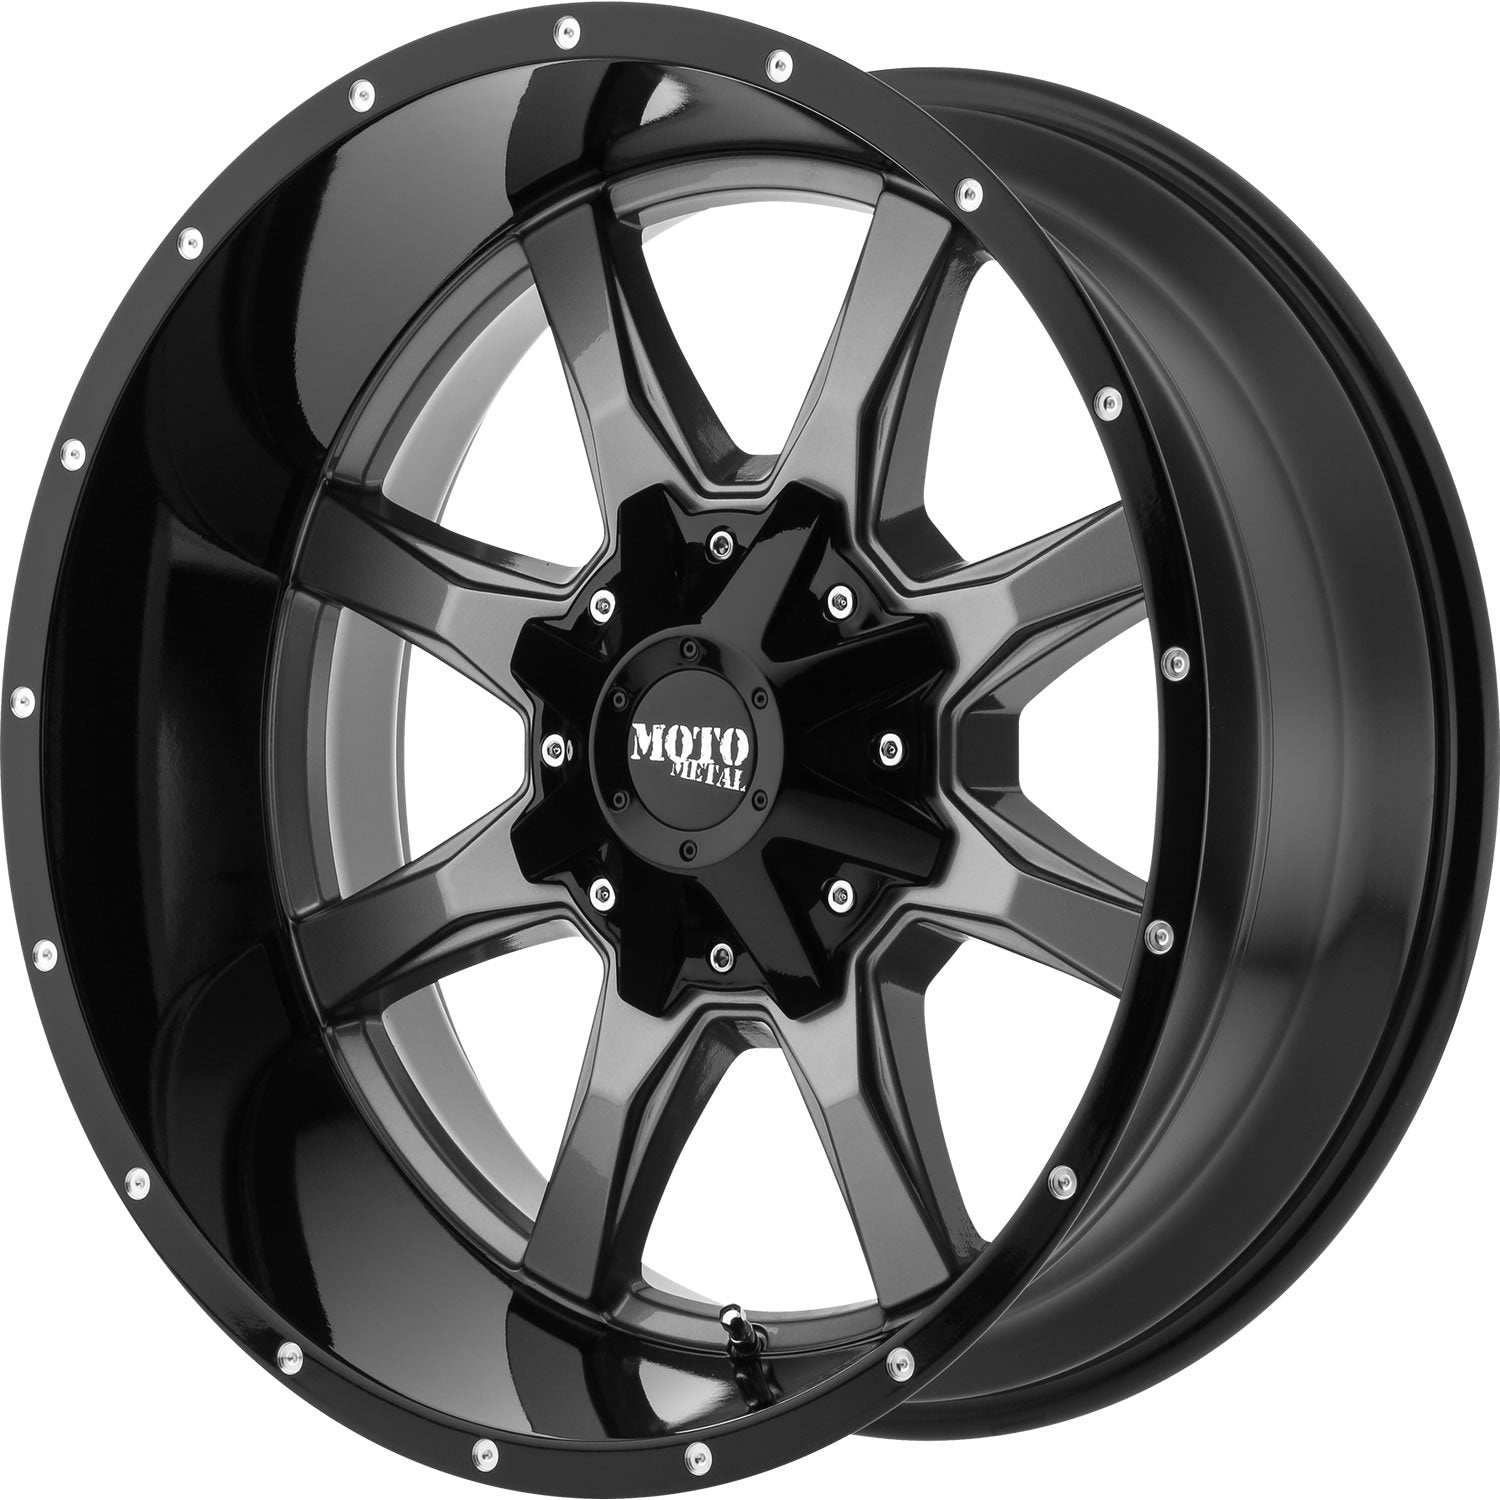 Moto Metal MO970 20x9 18 6x114.3 (6x4.5) Gray and Black - Tires and Engine Performance